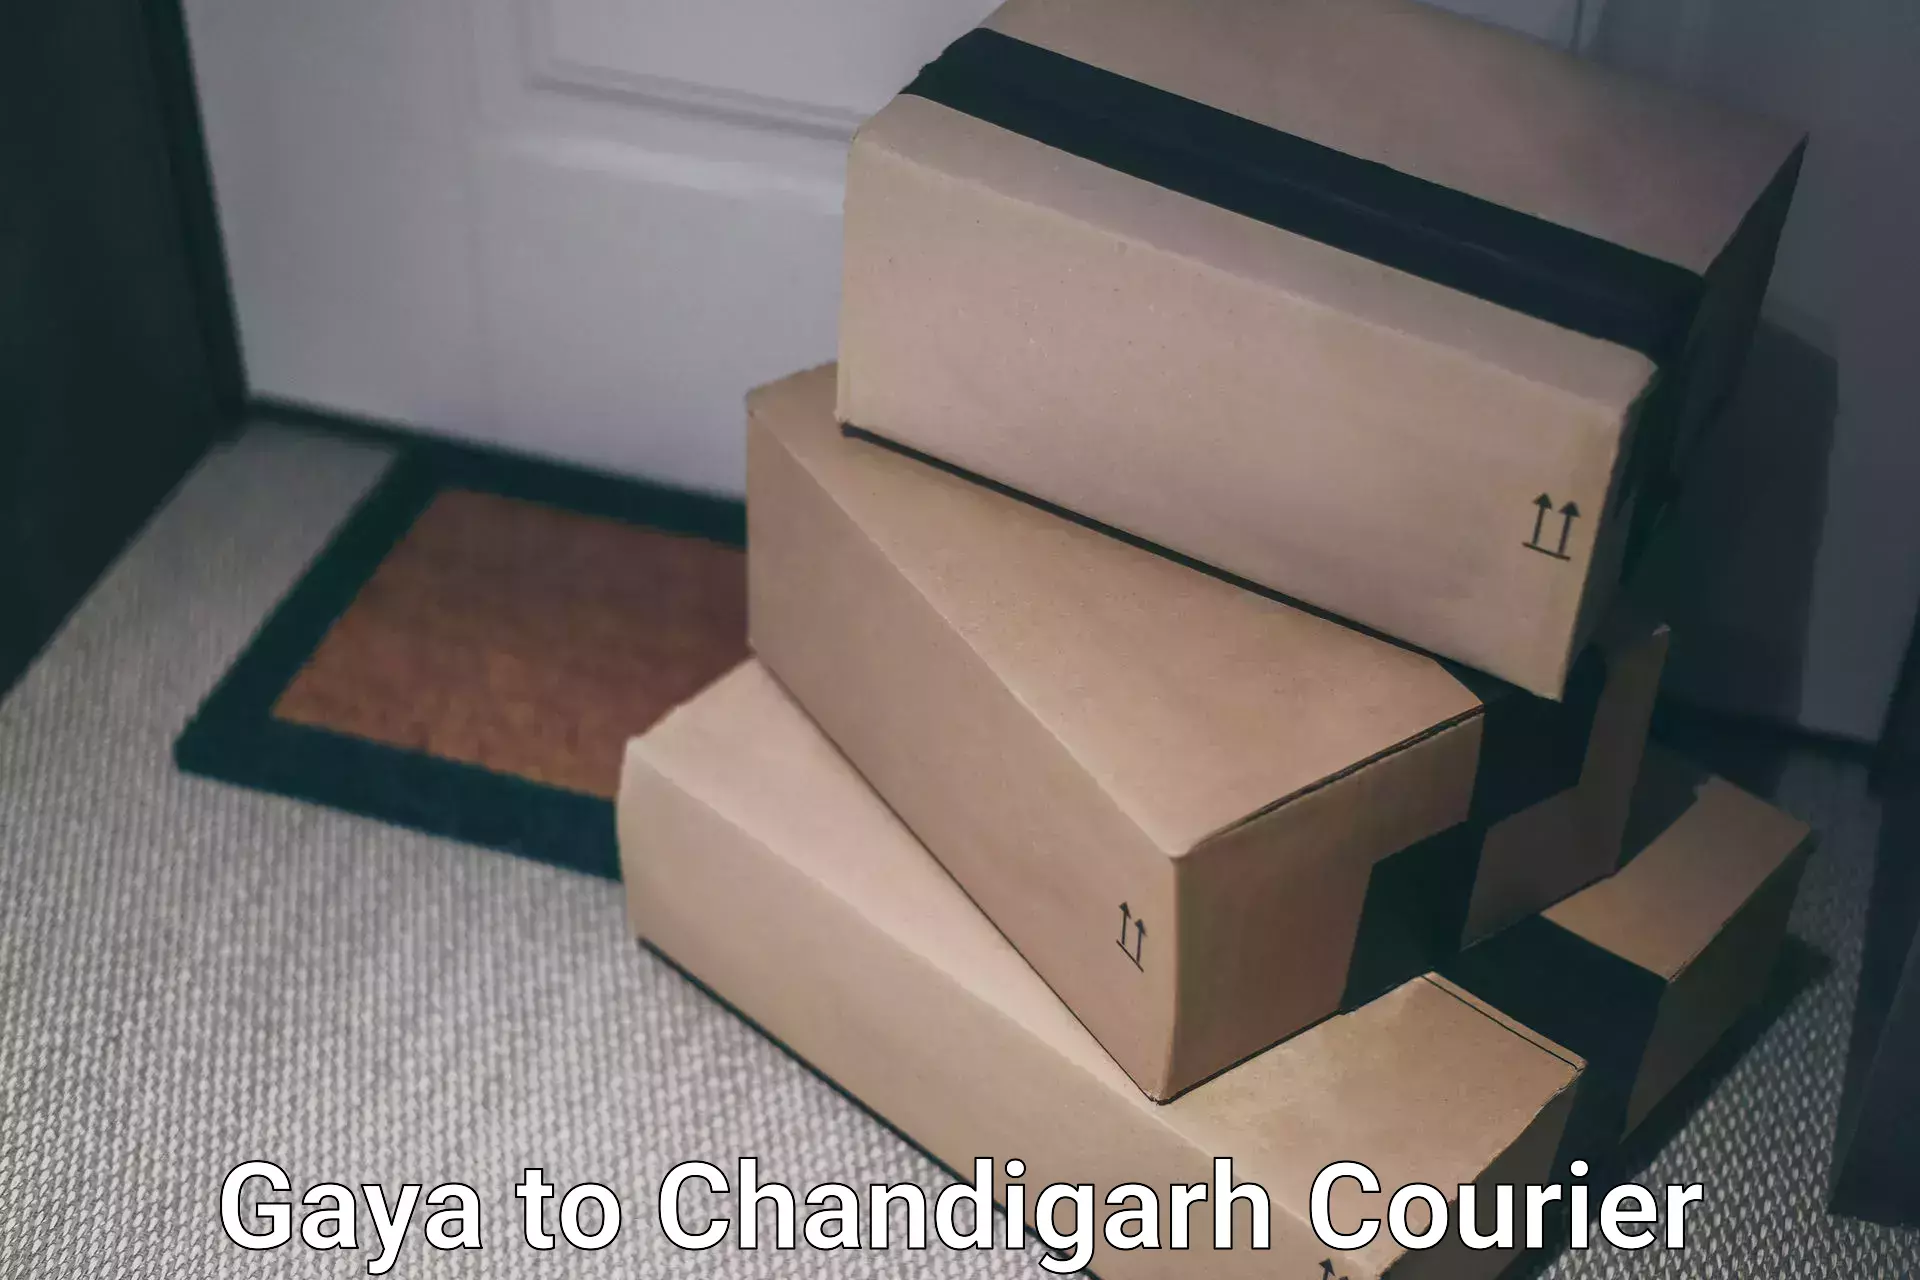 Courier service innovation in Gaya to Chandigarh